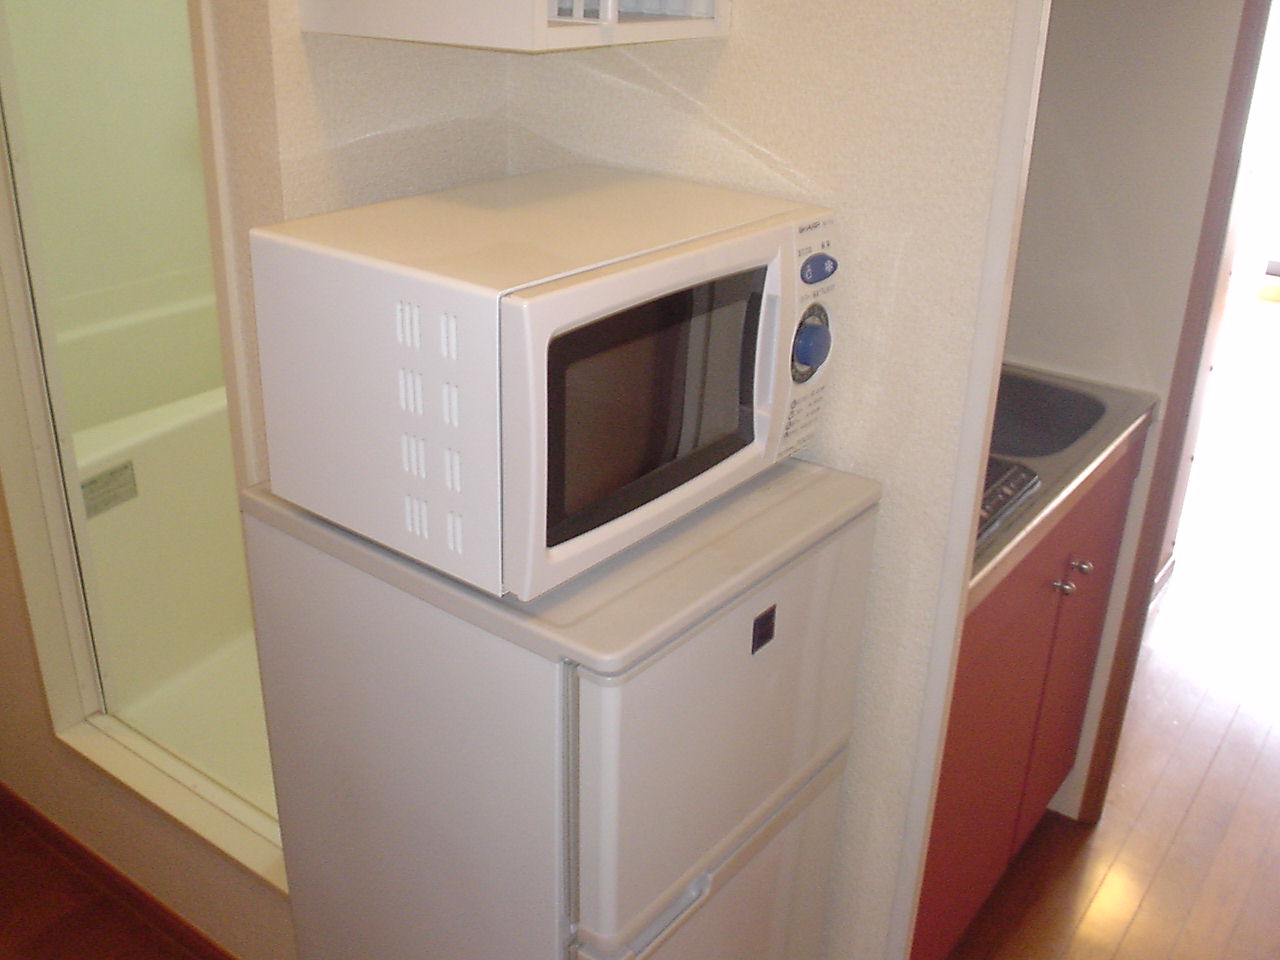 Other. microwave ・ Refrigerator is also equipped.